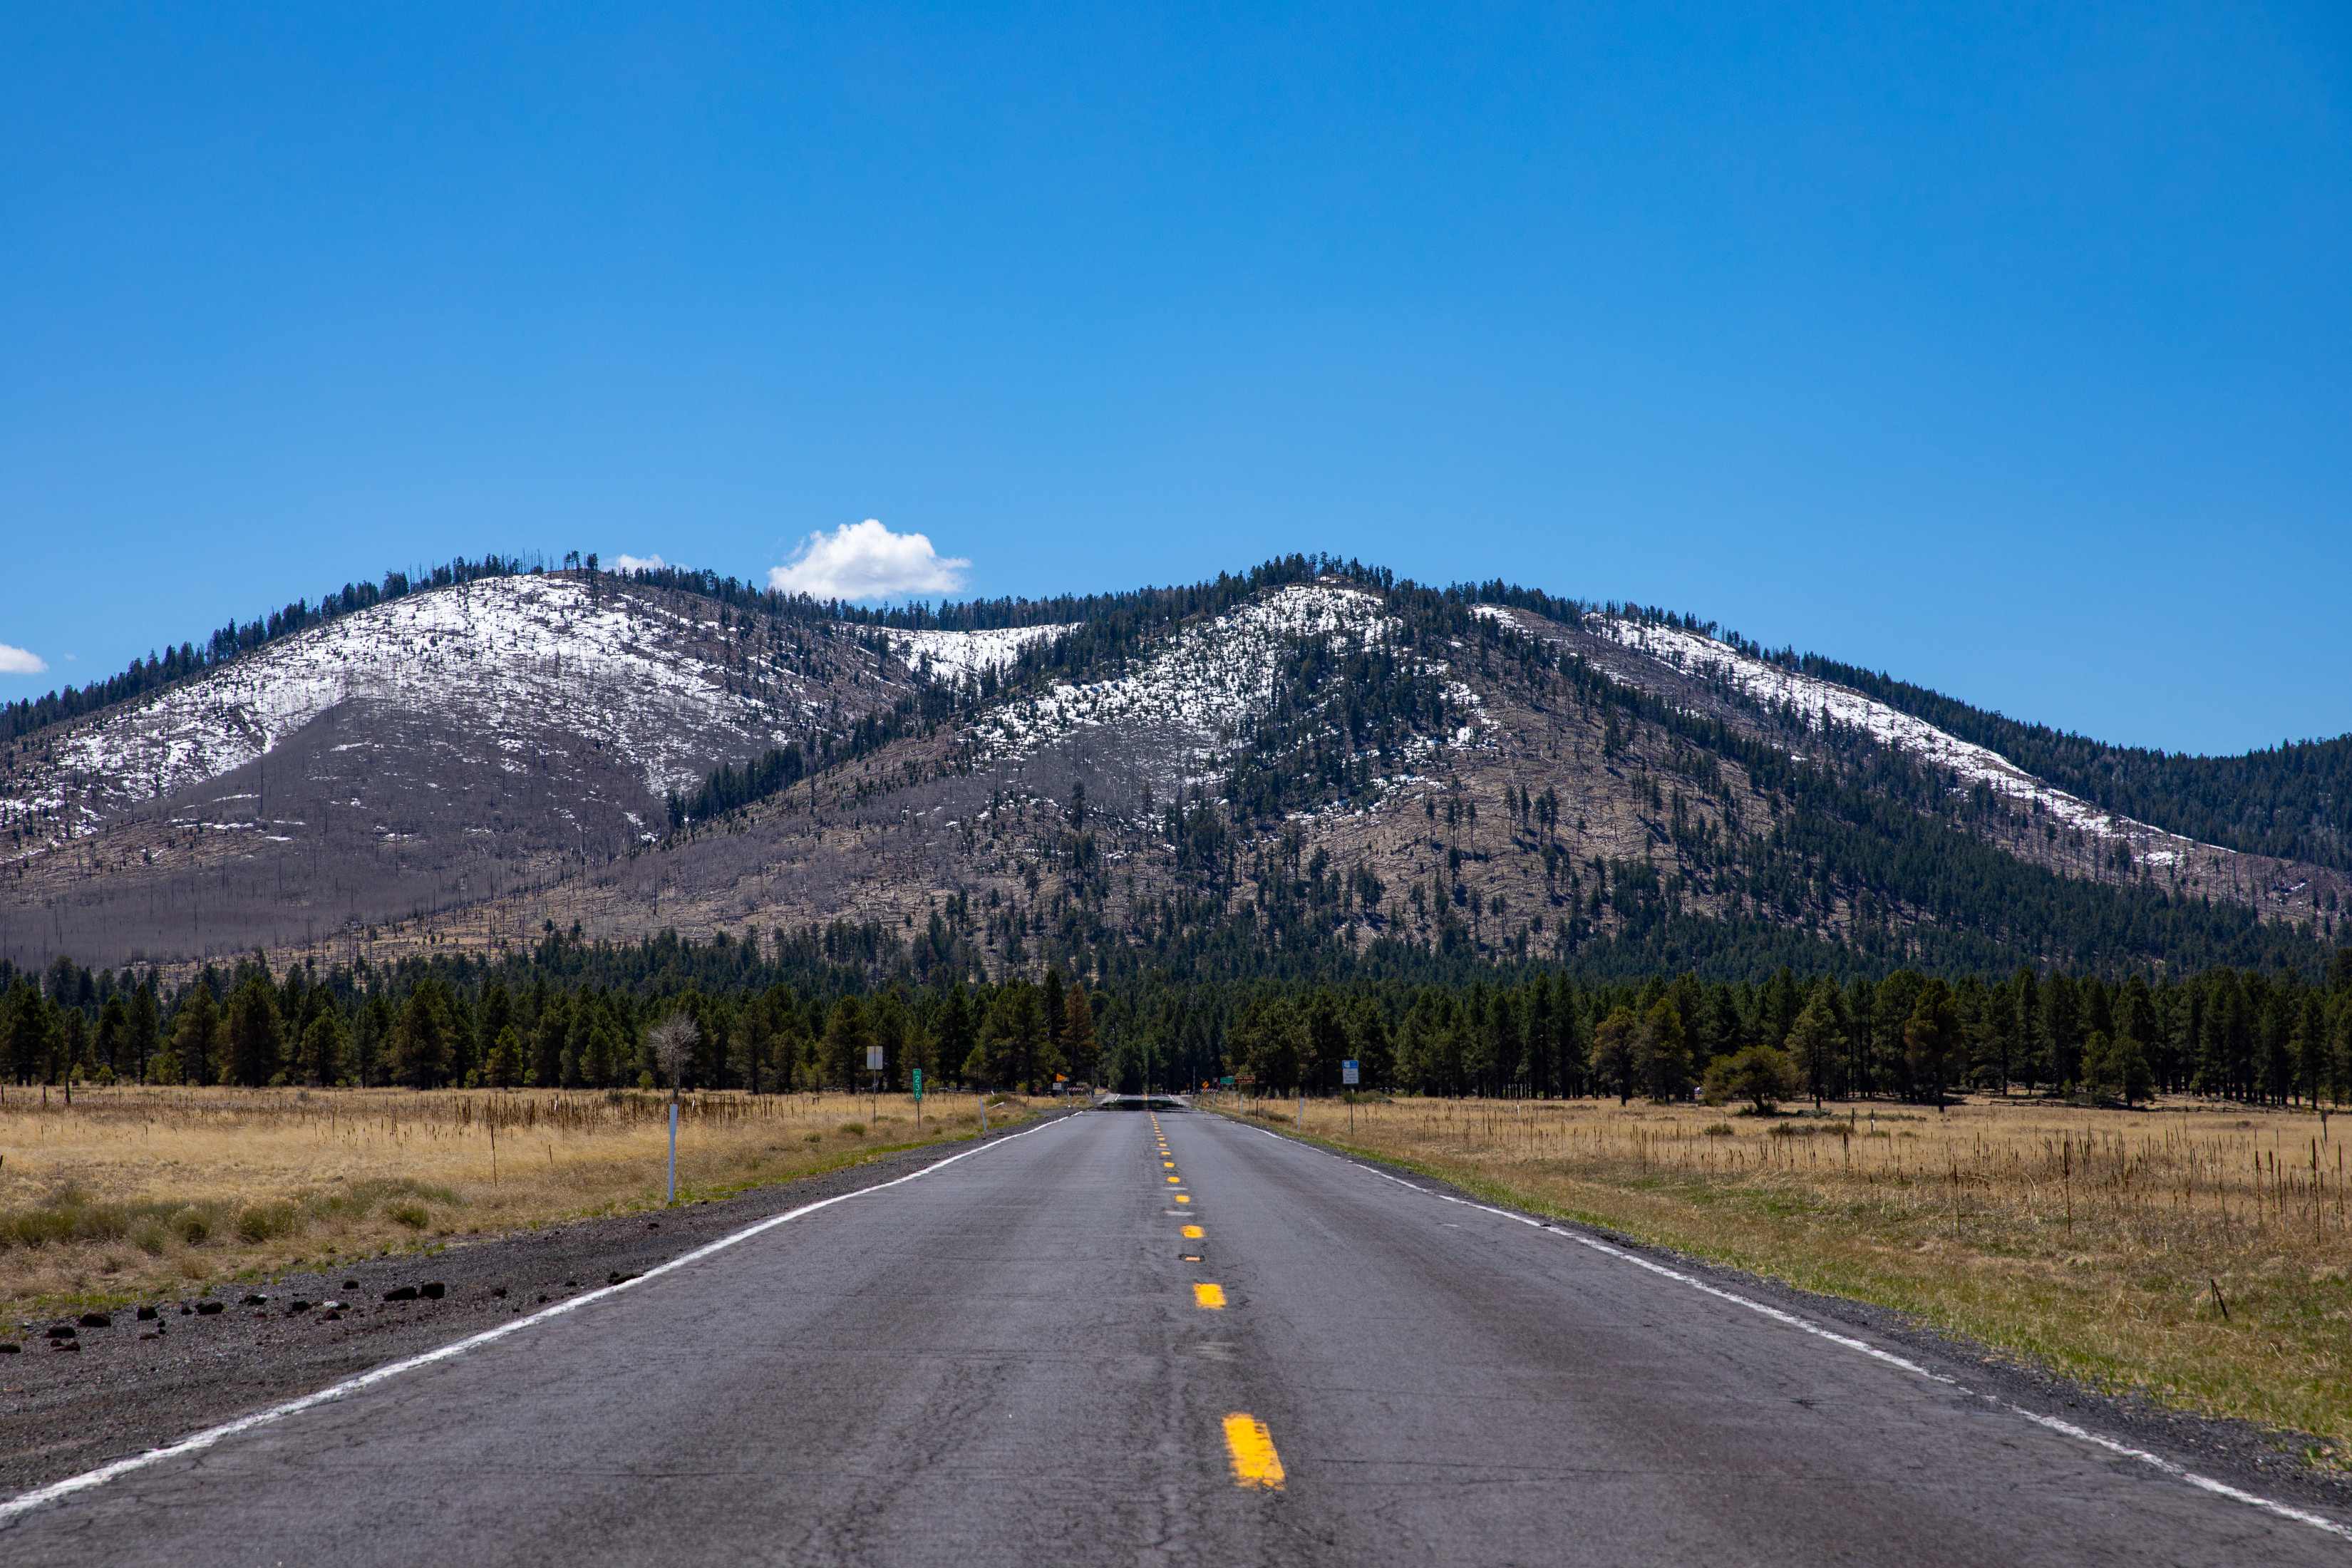 Road headed towards a landscape of trees and mountains in Flagstaff.